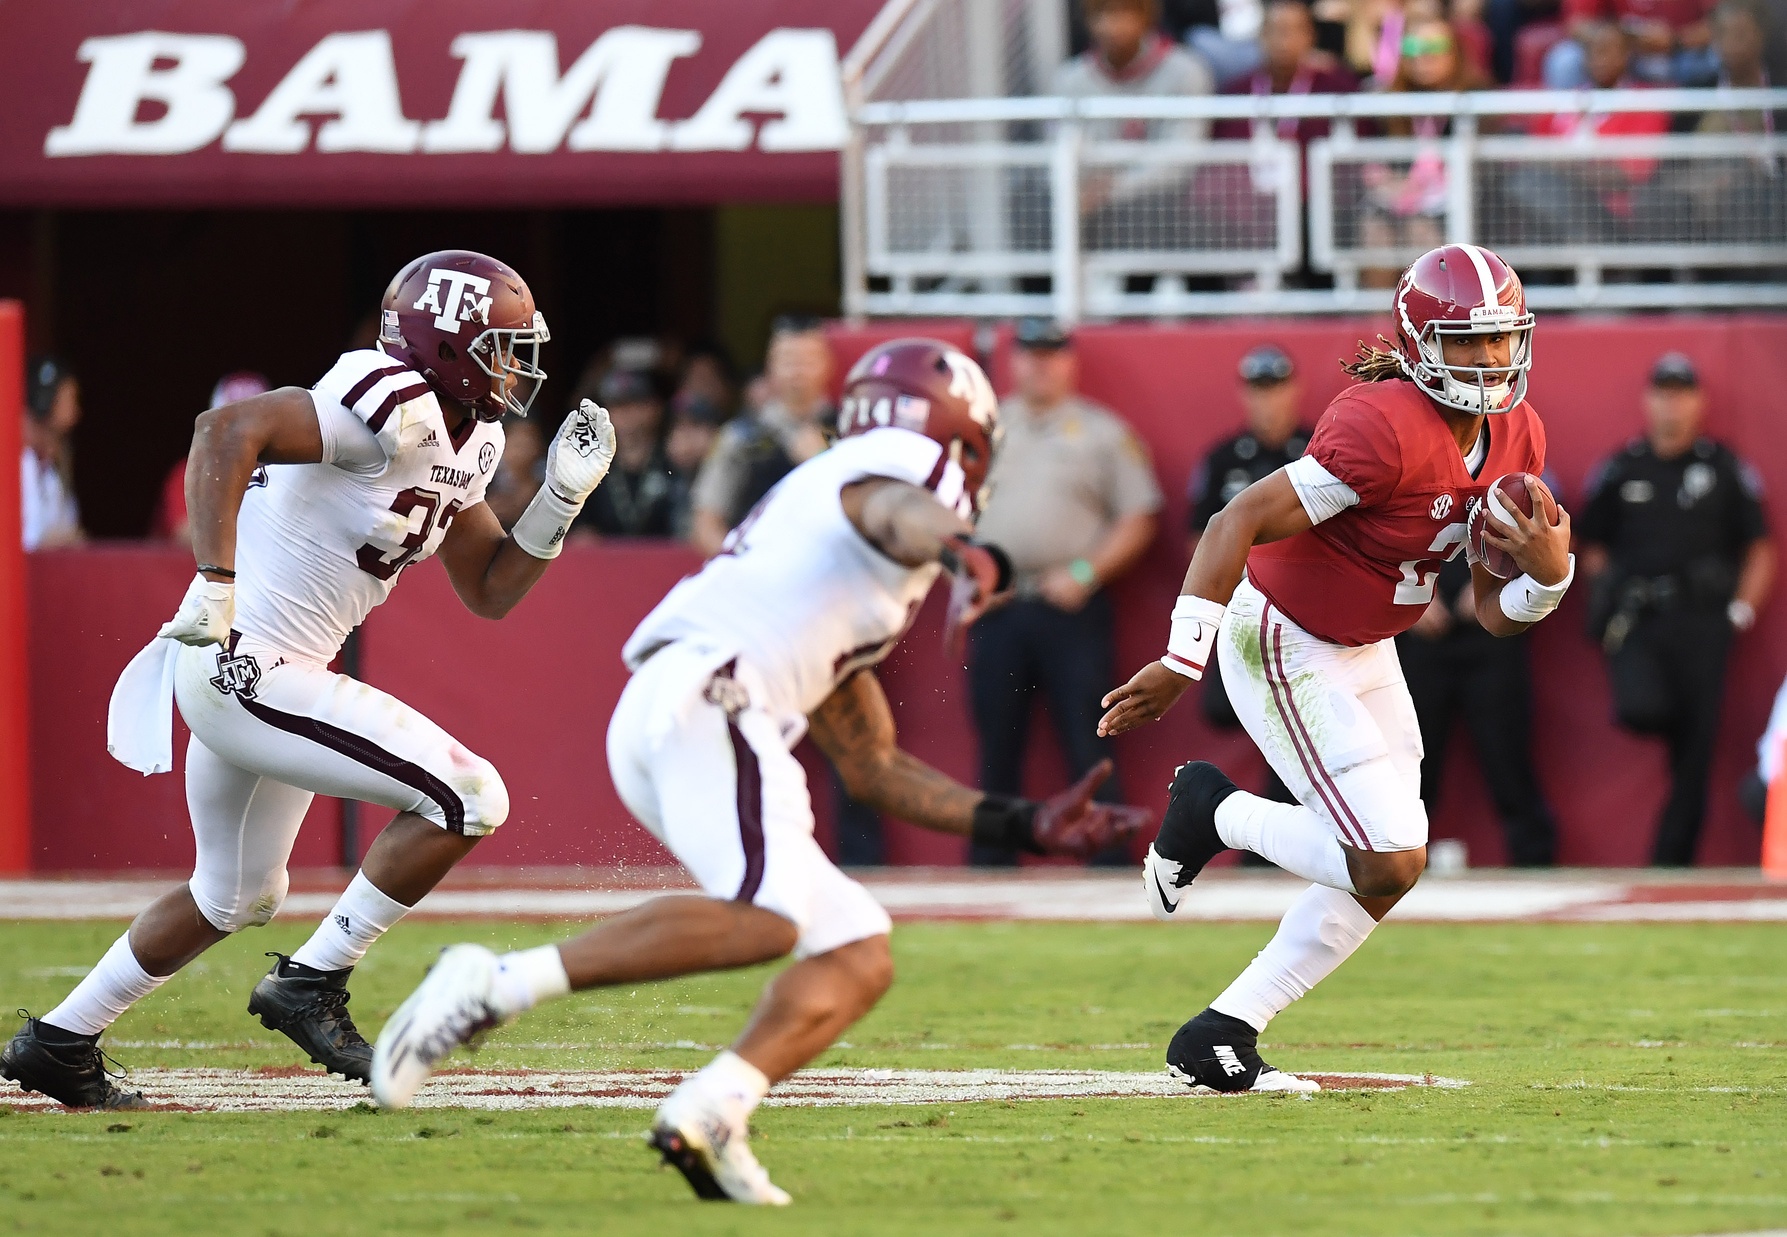 Oct 22, 2016; Tuscaloosa, AL, USA; Alabama Crimson Tide quarterback Jalen Hurts (2) carries the ball up the field against the Texas A&M Aggies during the third quarter at Bryant-Denny Stadium. Mandatory Credit: John David Mercer-USA TODAY Sports